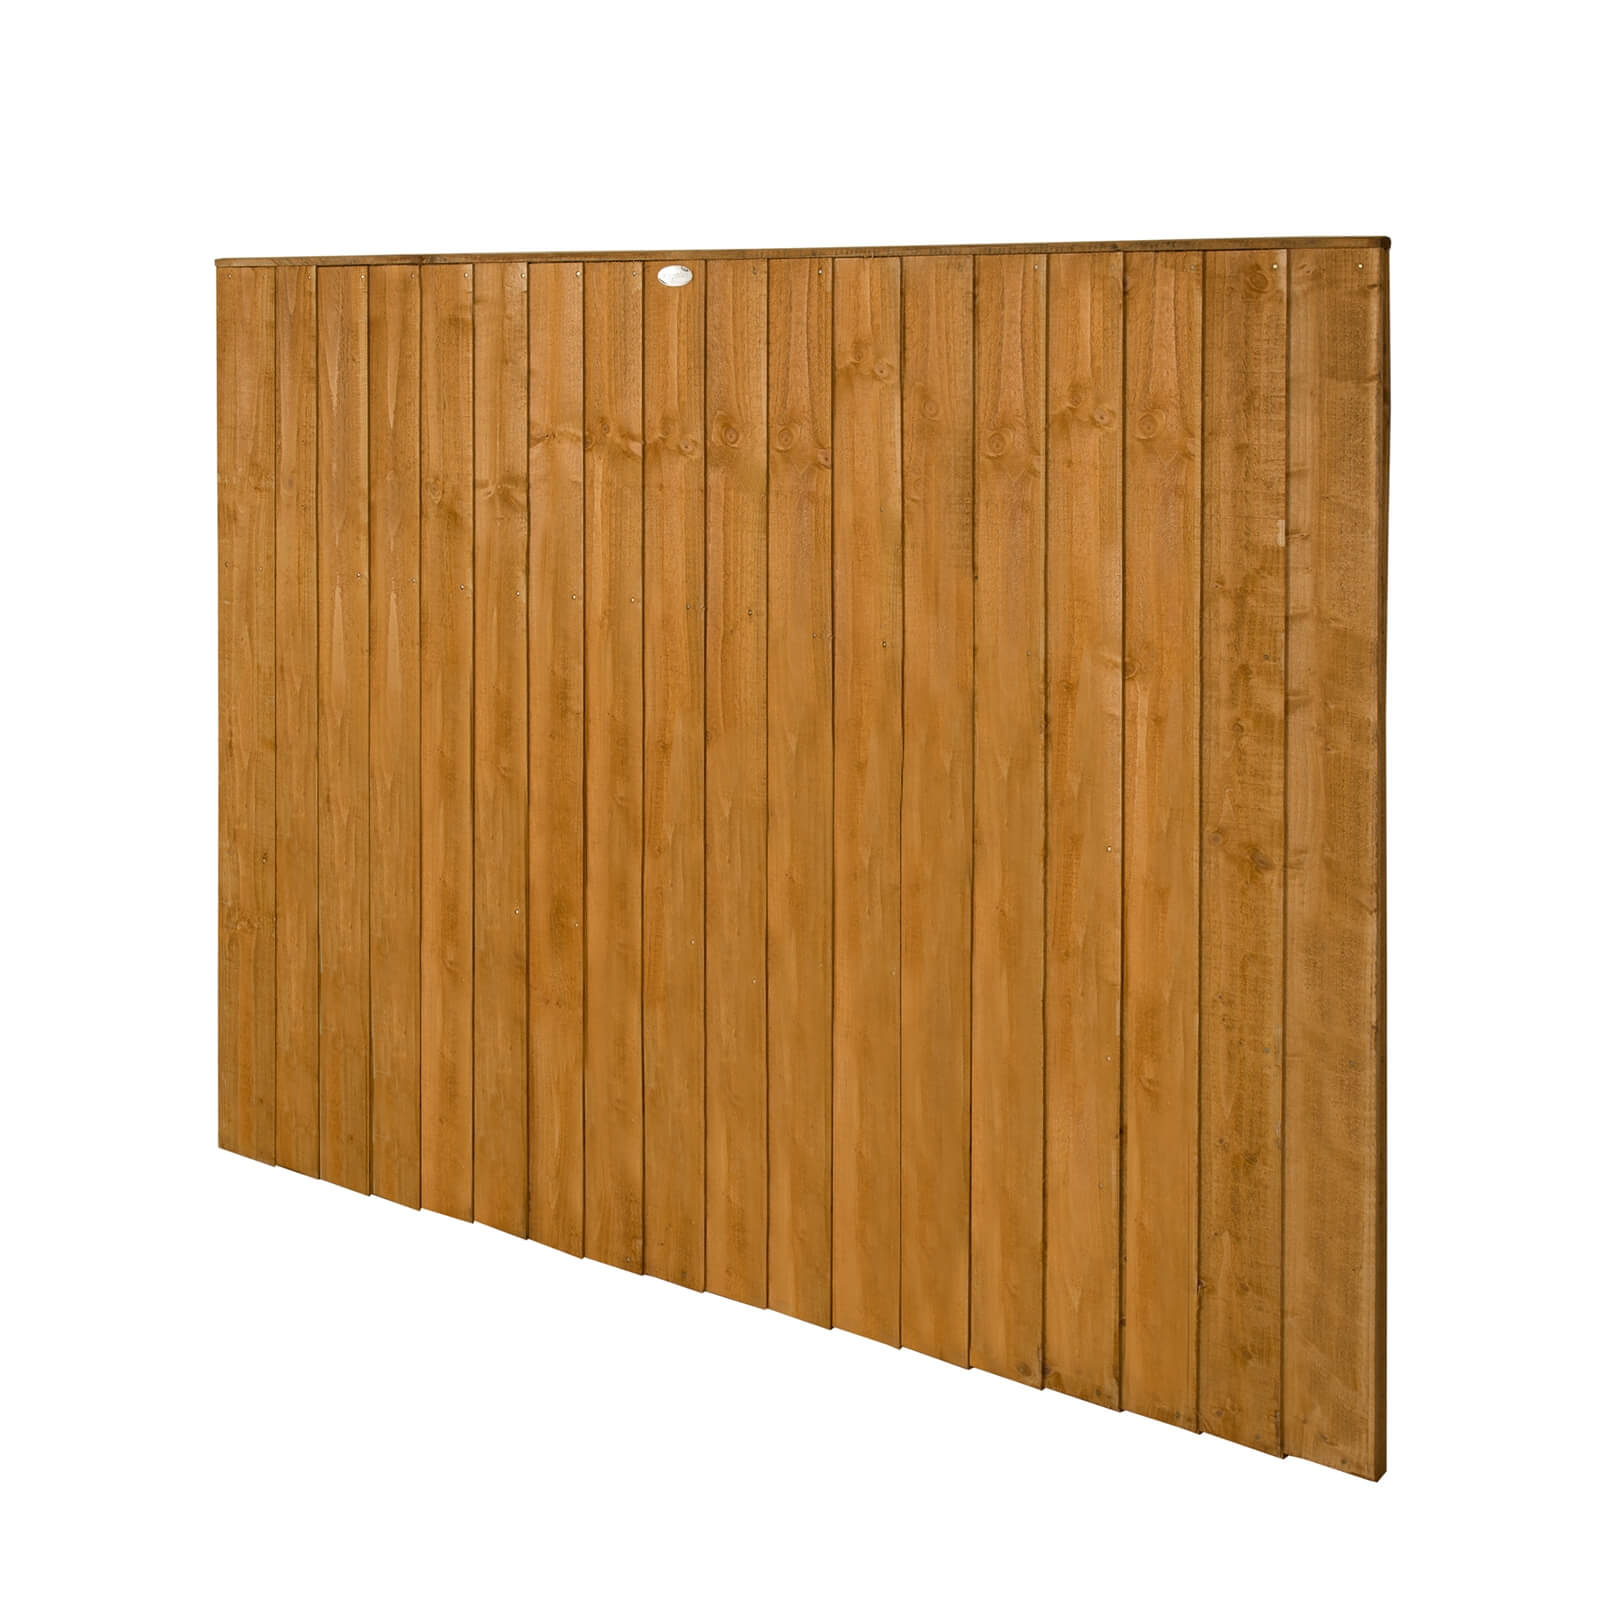 Forest Featherdge Dip Treated Fence Panel - 5ft - Pack of 4